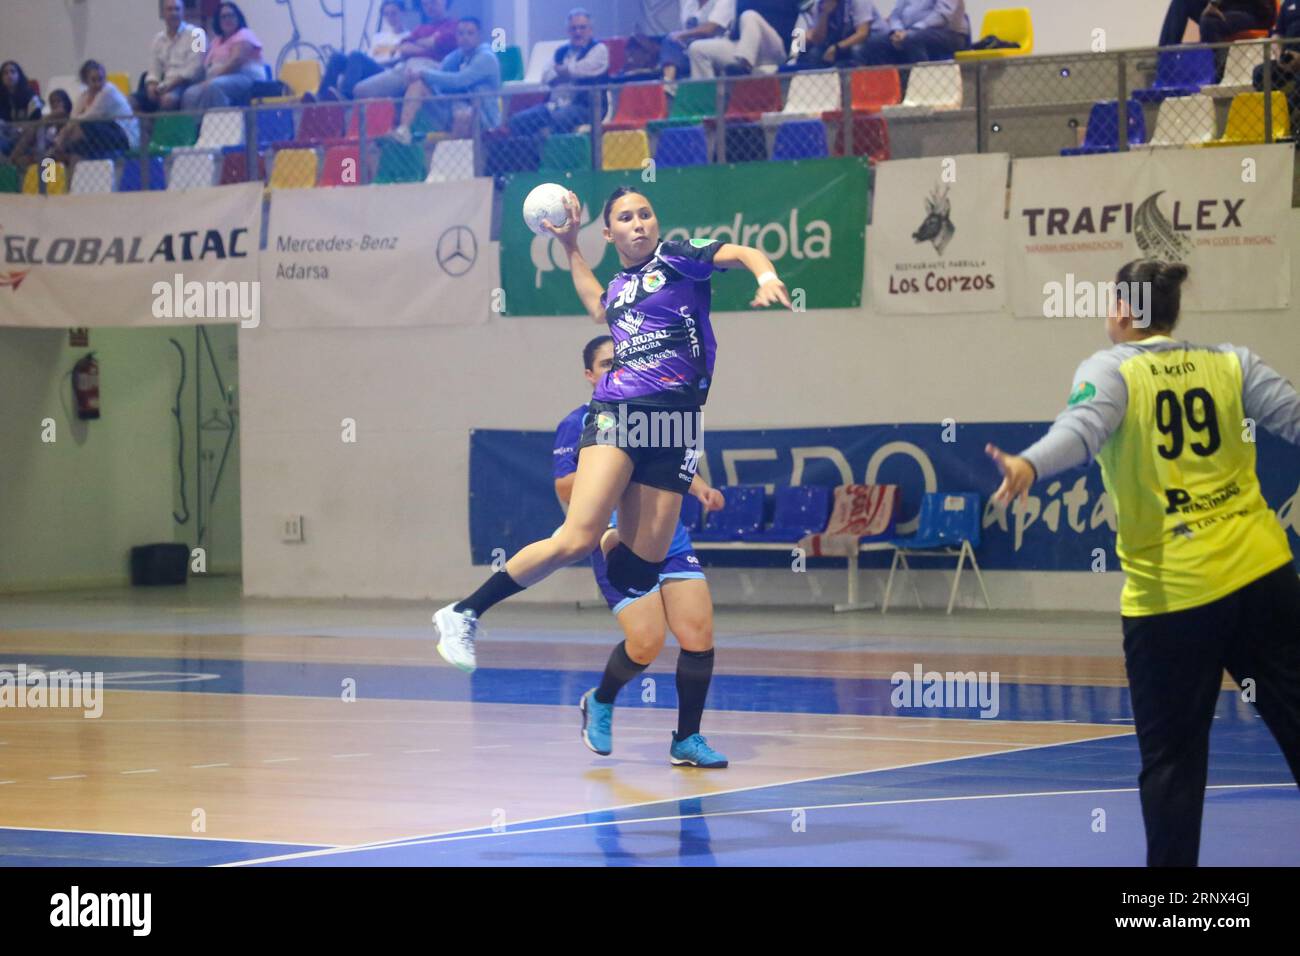 Oviedo, Spain, 02nd September, 2023: Caja Rural Aula Valladolid player, Martina Romero (30) shoots at goal during the first day of the Liga Guerreras Iberdrola between Lobas Global Atac Oviedo and Caja Rural Aula Valladolid, on 02 September 2023, at the Florida Arena Municipal Sports Center, in Oviedo, Spain. Credit: Alberto Brevers / Alamy Live News. Stock Photo